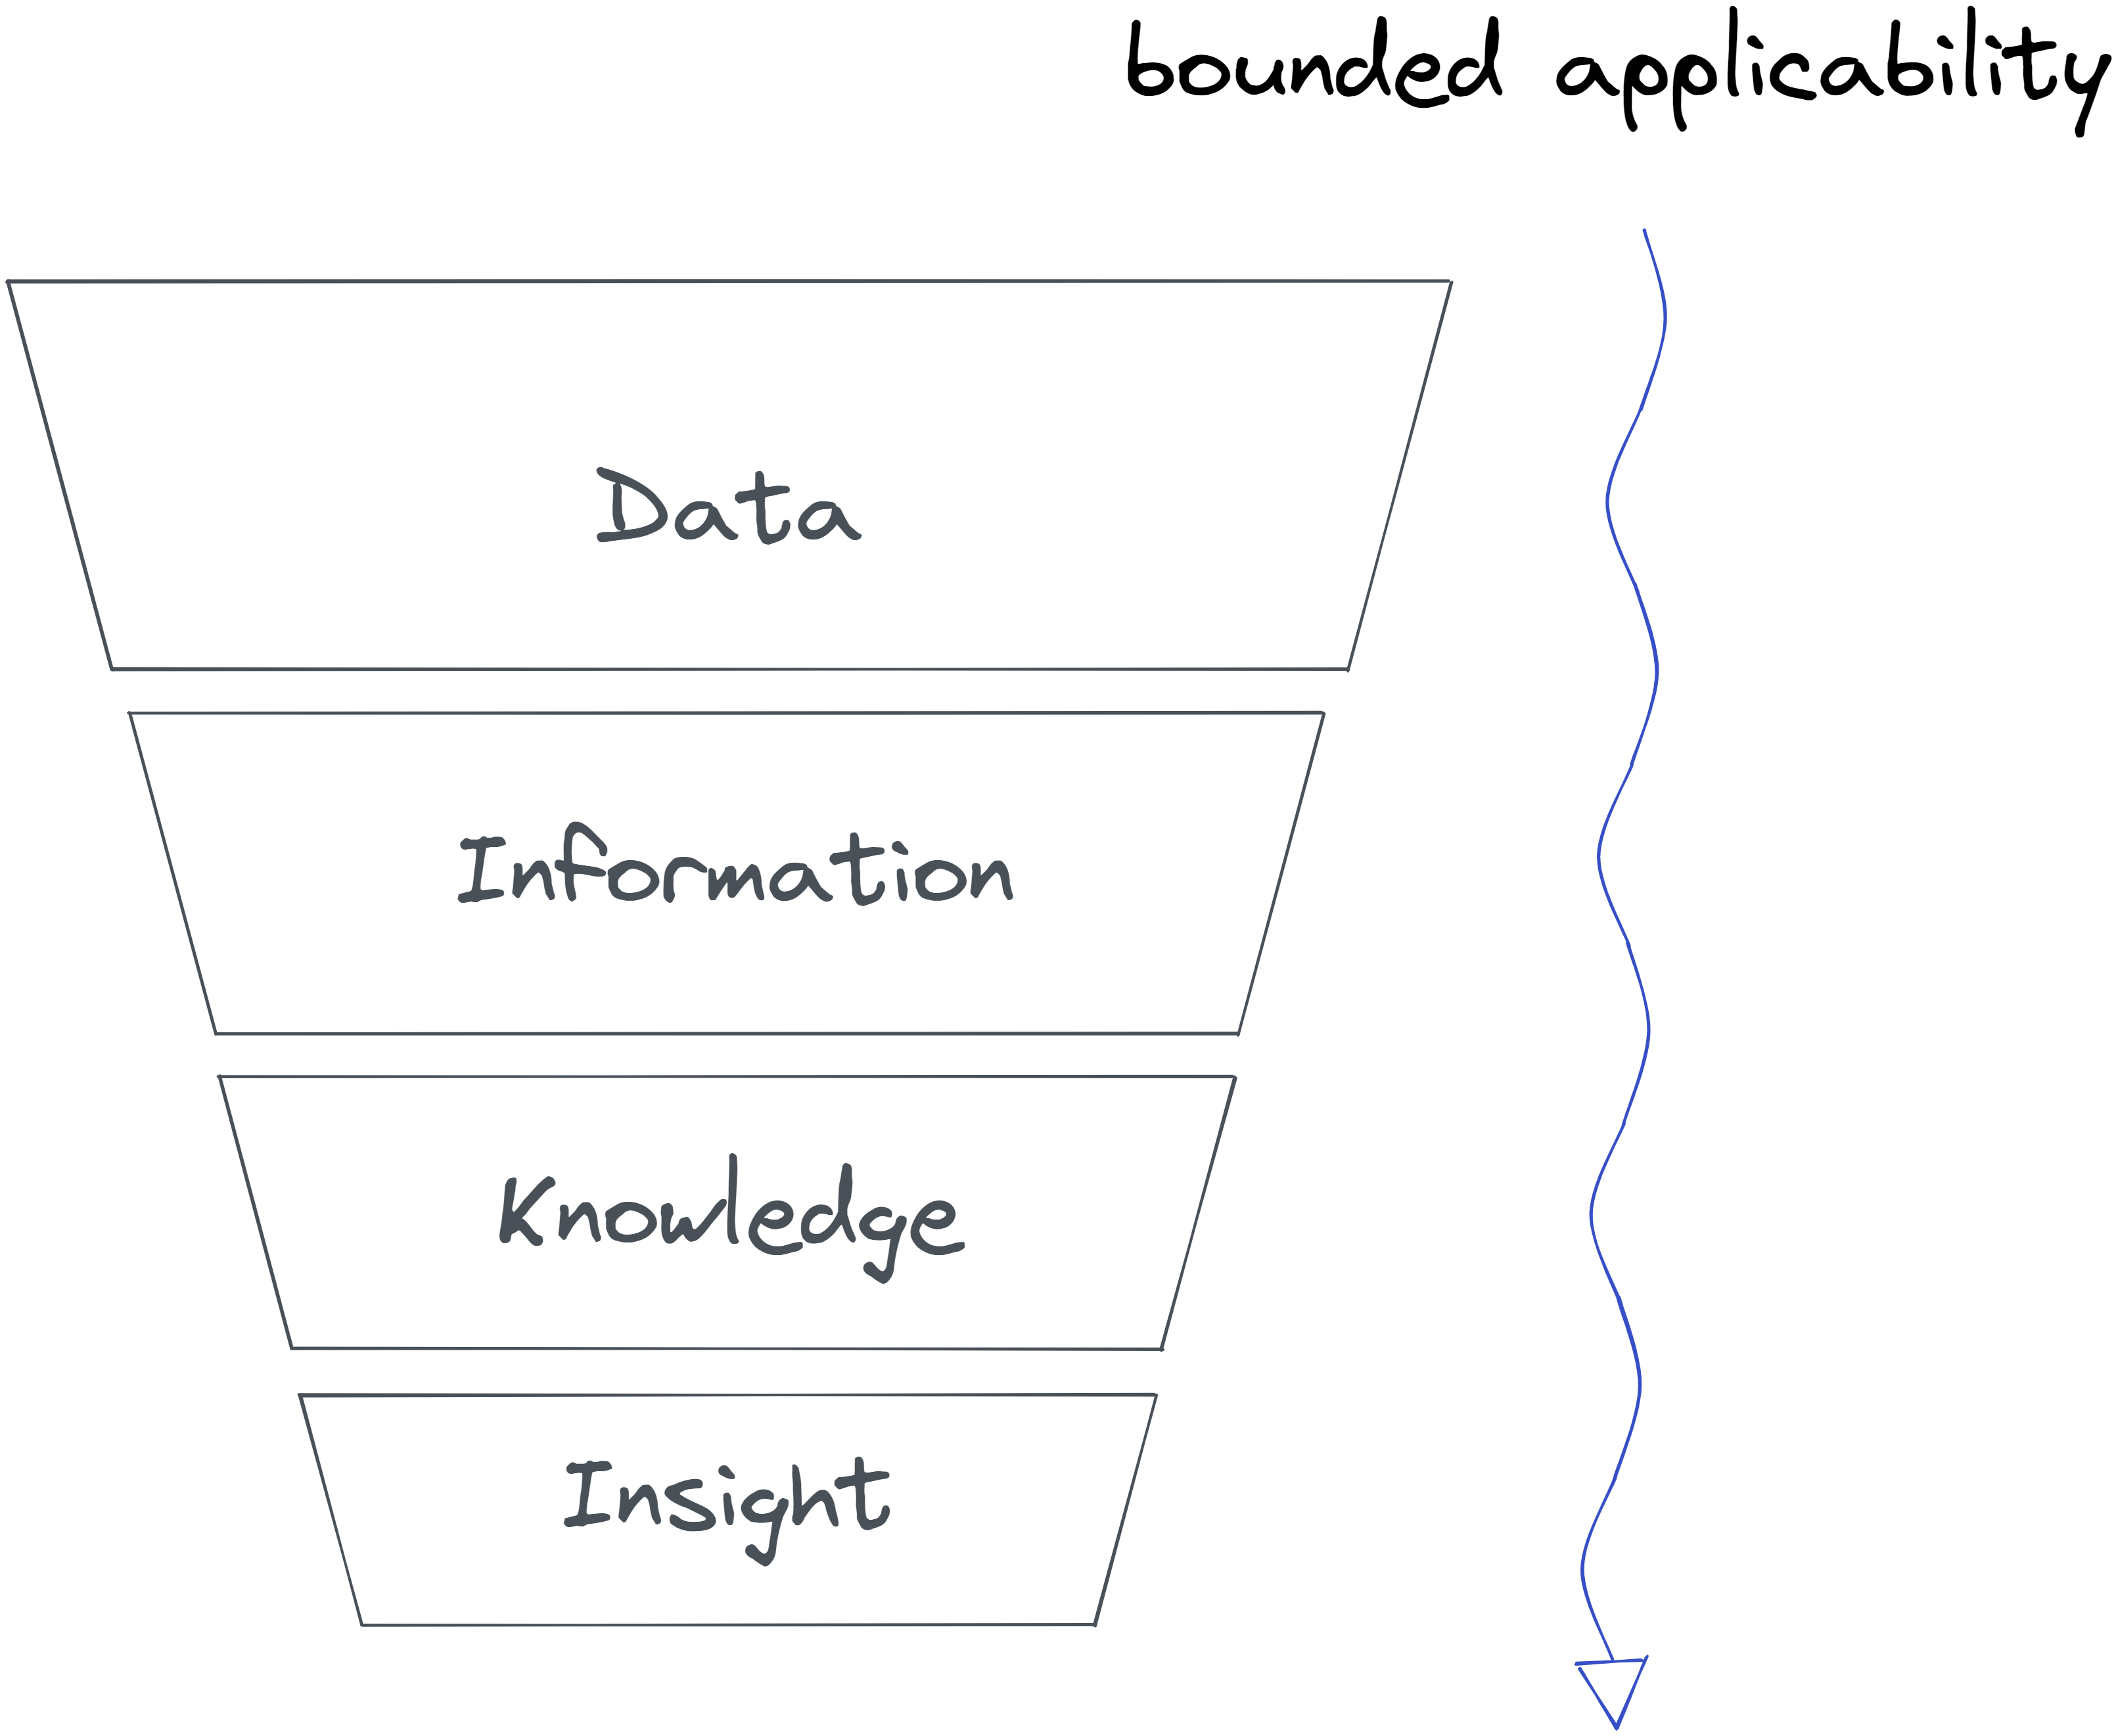 bounded-applicability-data-semantics.excalidraw